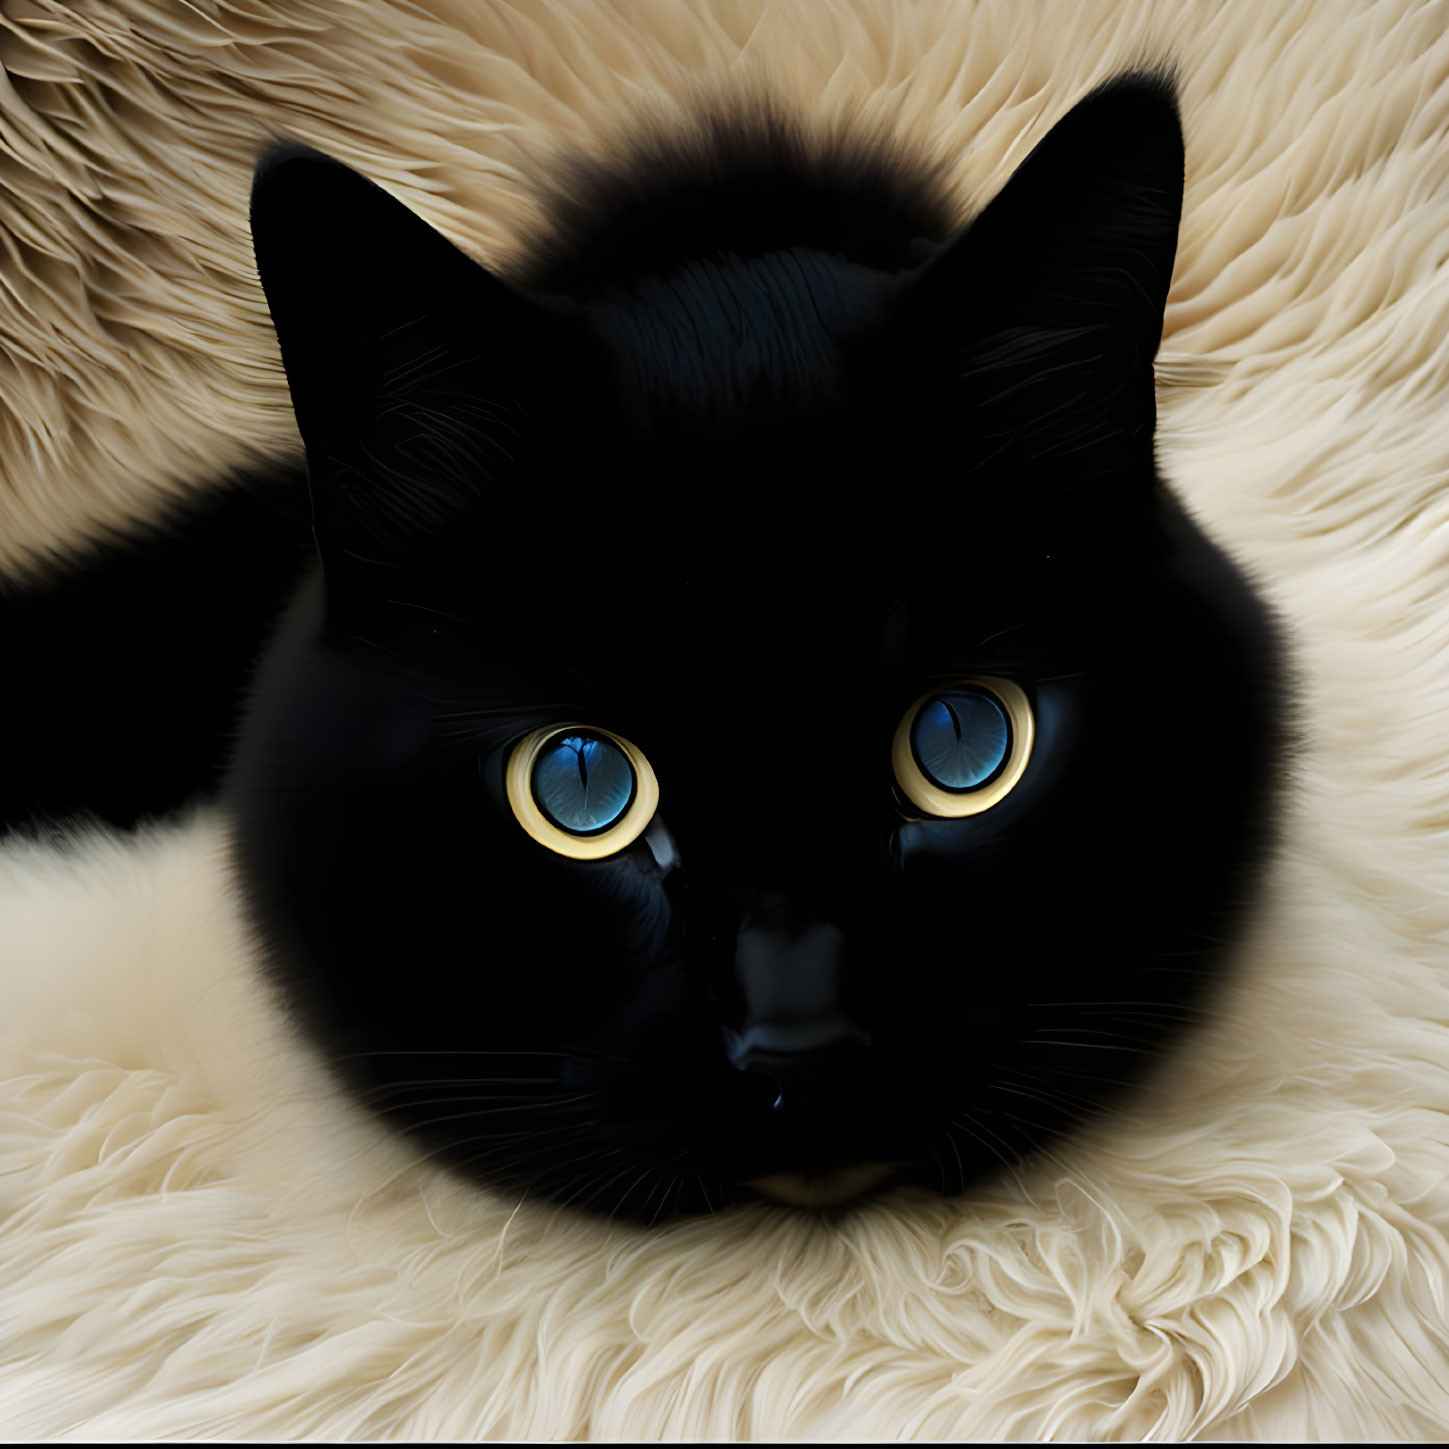 Black Cat with Striking Yellow Eyes on Fluffy White Surface